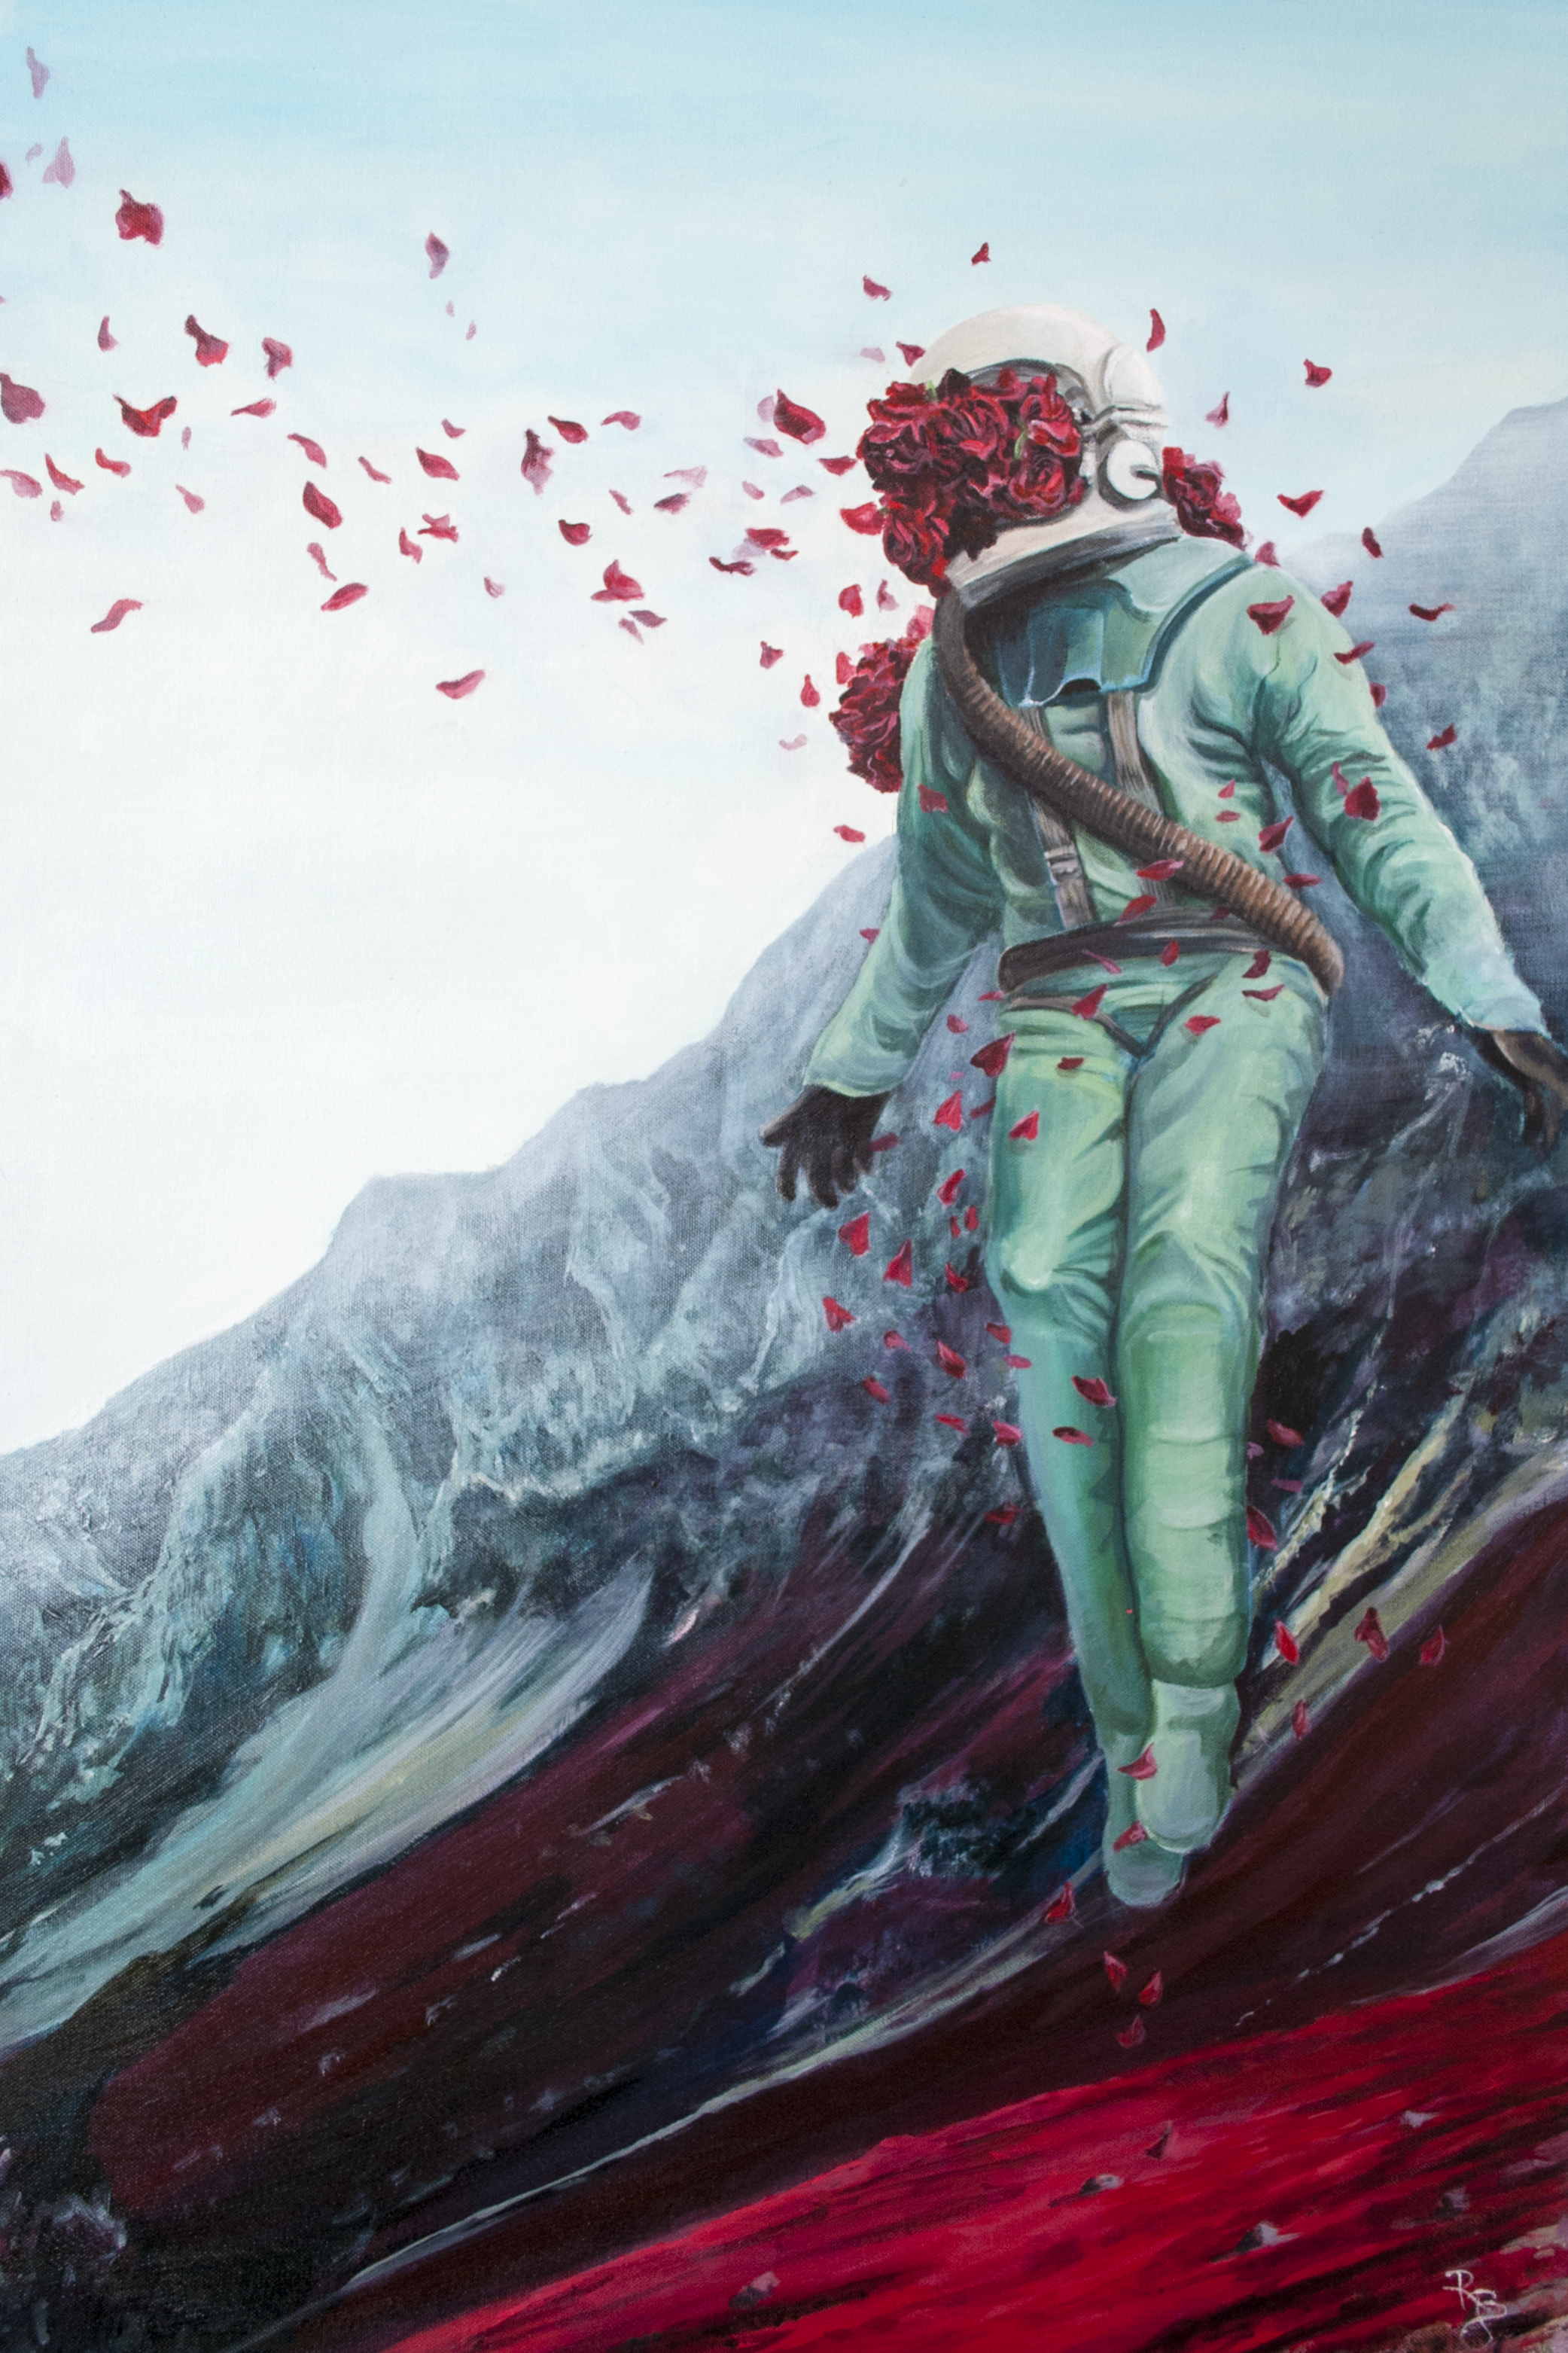 levitating astronaut with a helmet exploding with flowers placed in a mountainous terrain